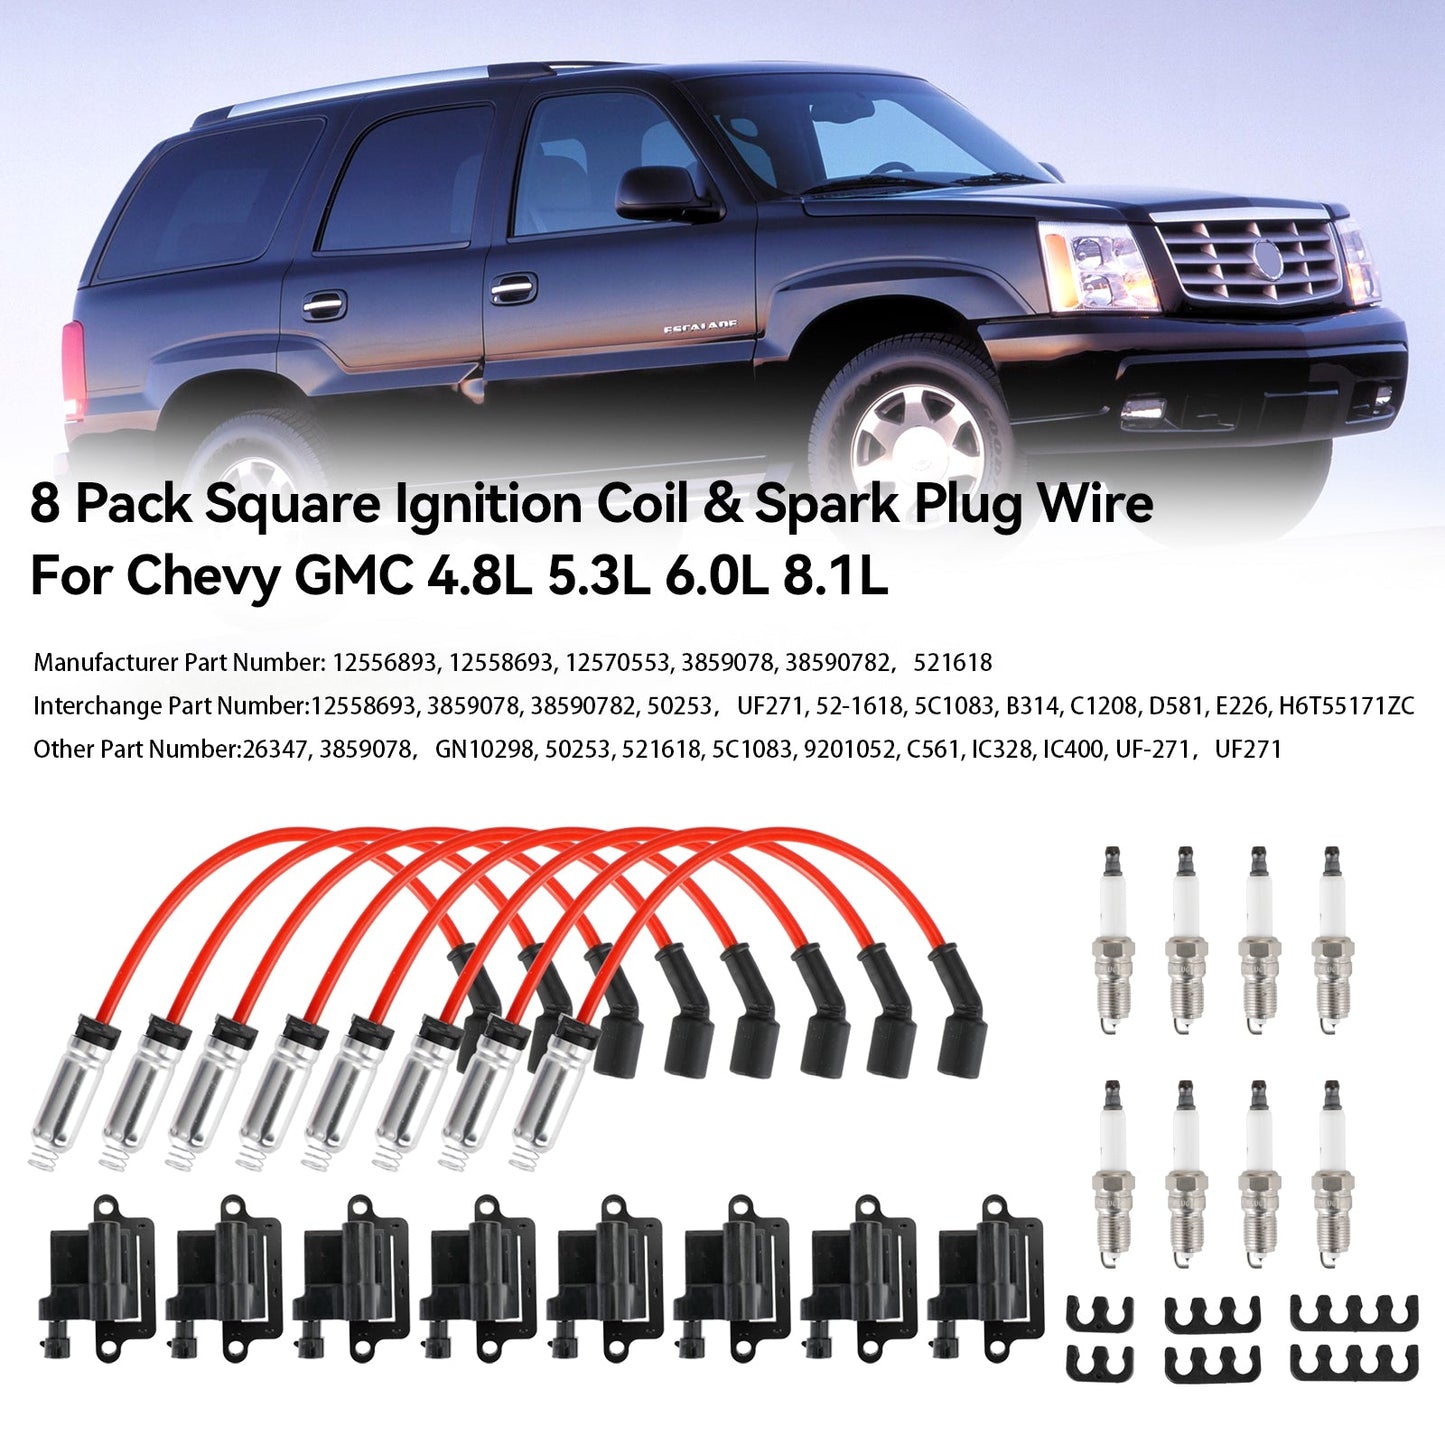 2005 Workhorse Fastrack FT1261 / 2006 Chevrolet Monte Carlo 8 Pack Square Ignition Coil & Spark Plug Wire